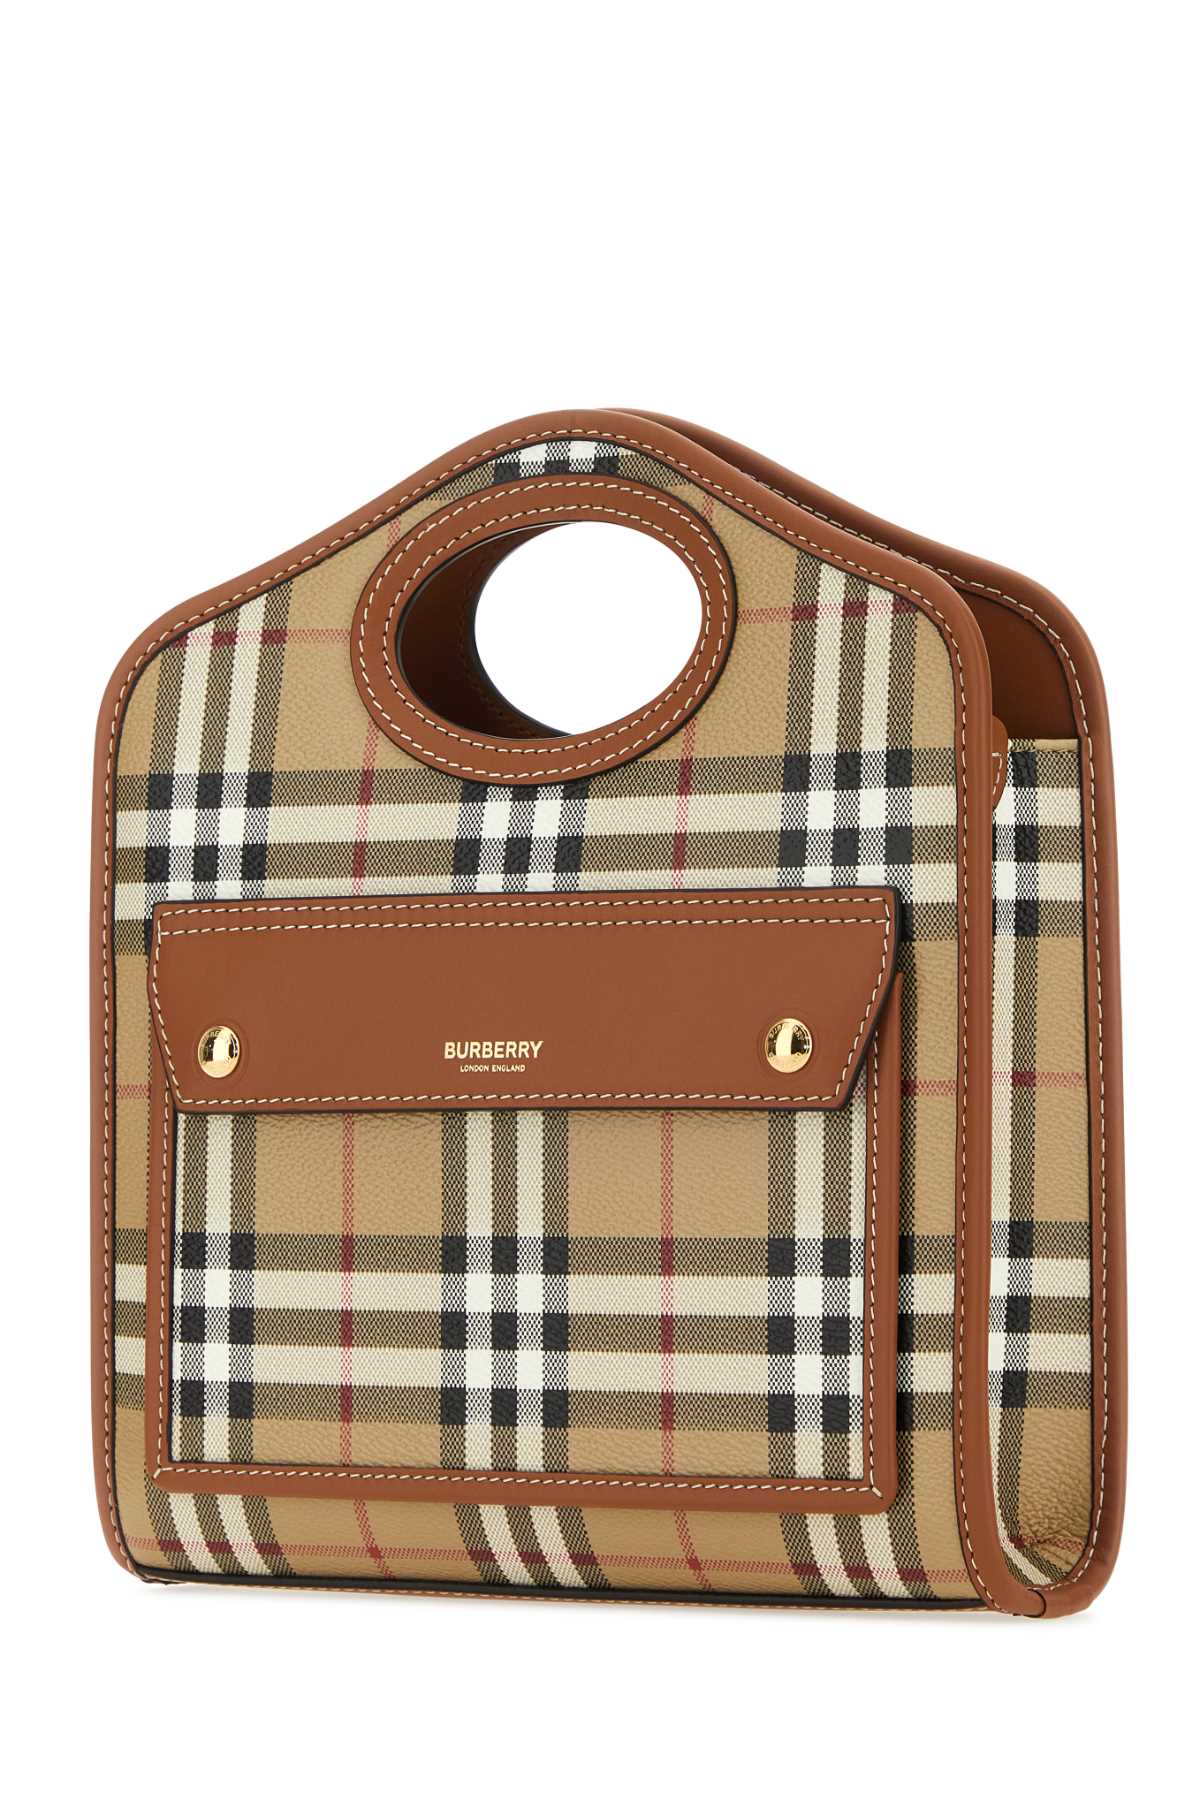 Shop Burberry Printed Canvas And Leather Mini Pocket Handbag In Briarbrown